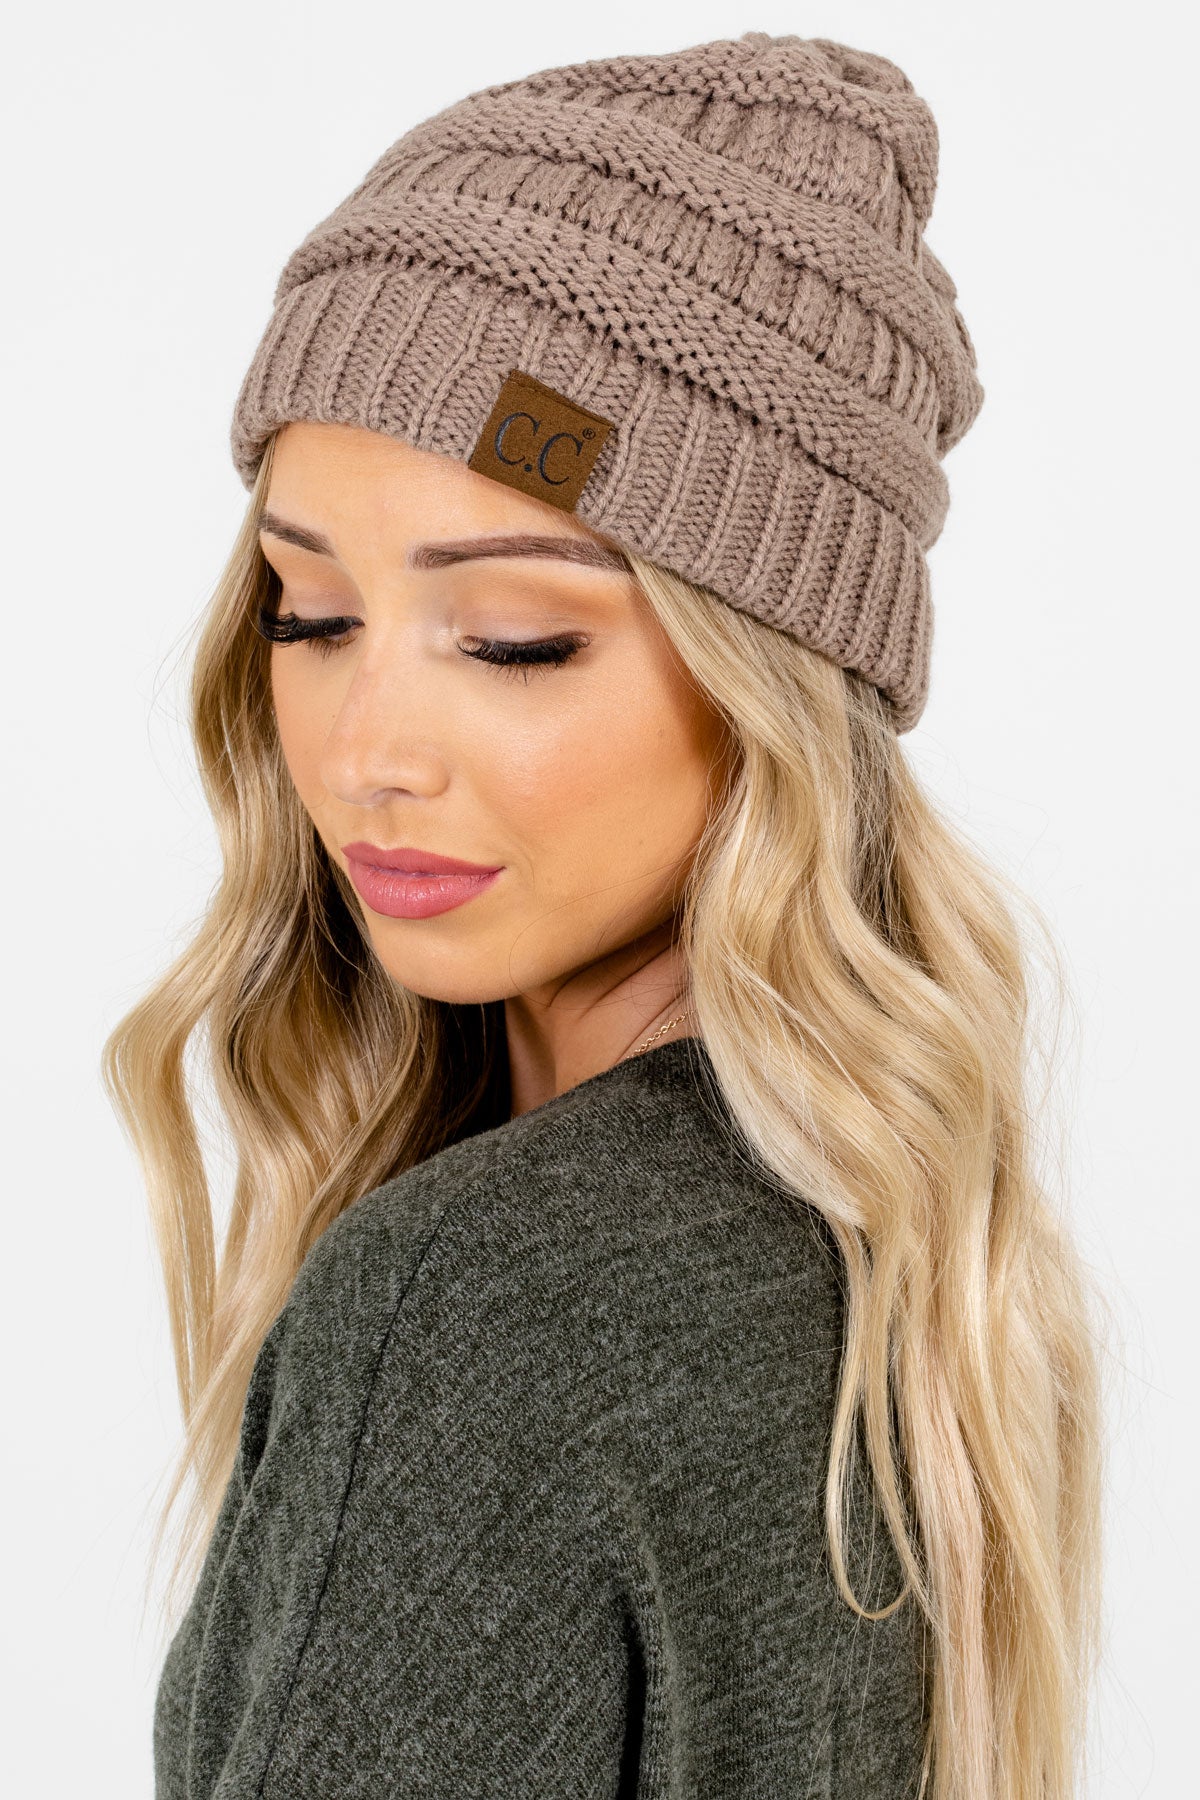 Taupe Brown High-Quality Knit Boutique Beanies for Women